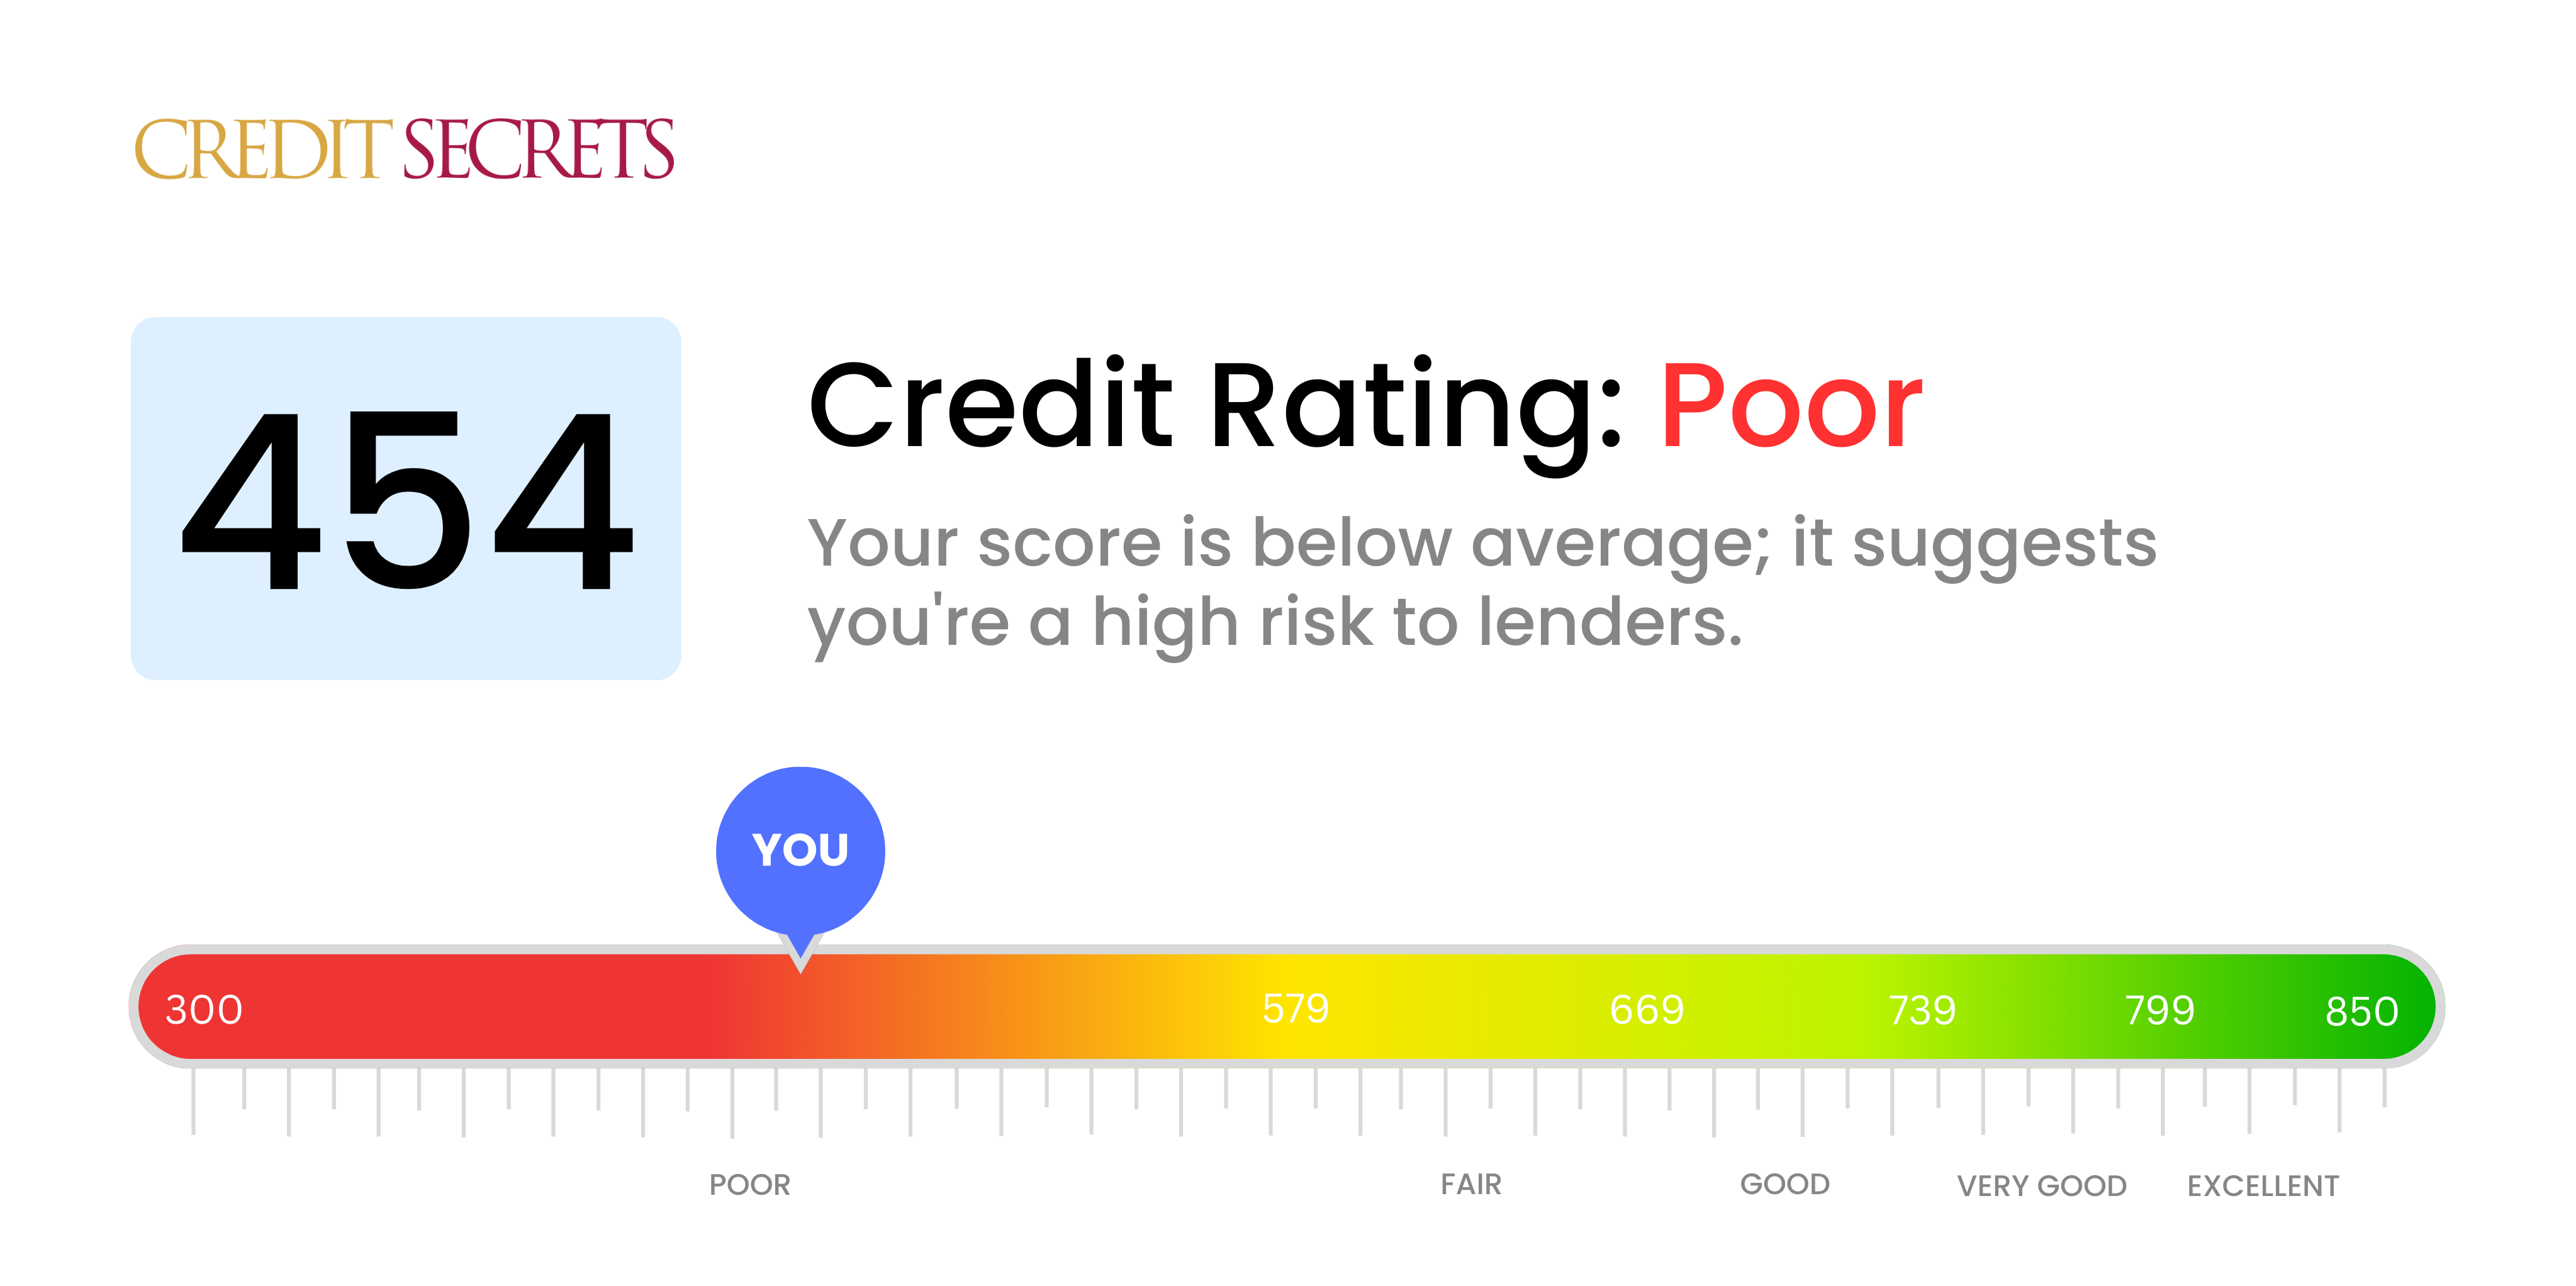 Is 454 a good credit score?